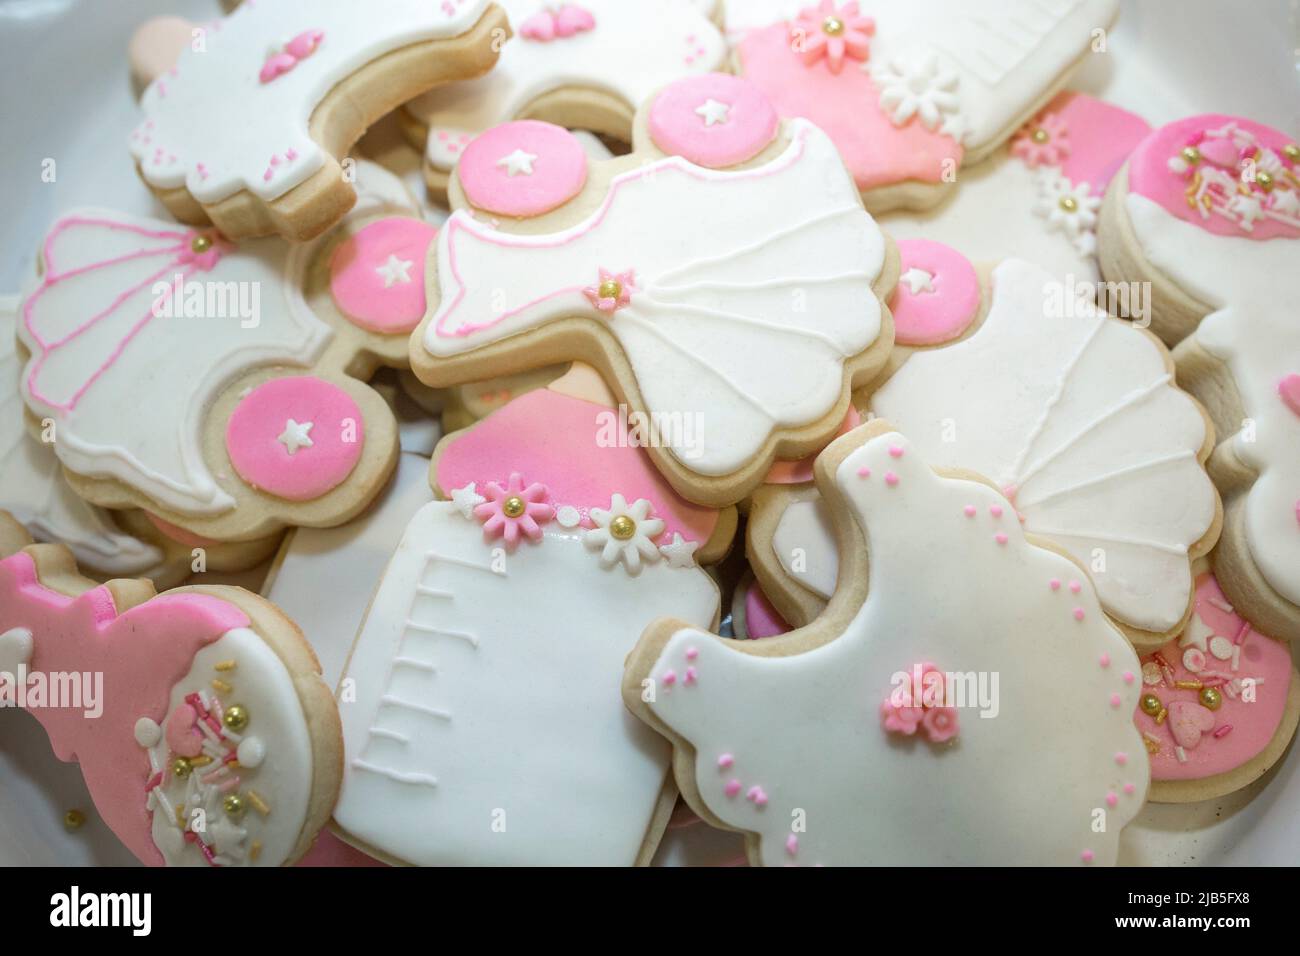 Platter full of baptism or christening cookies. Overhead view. Stock Photo